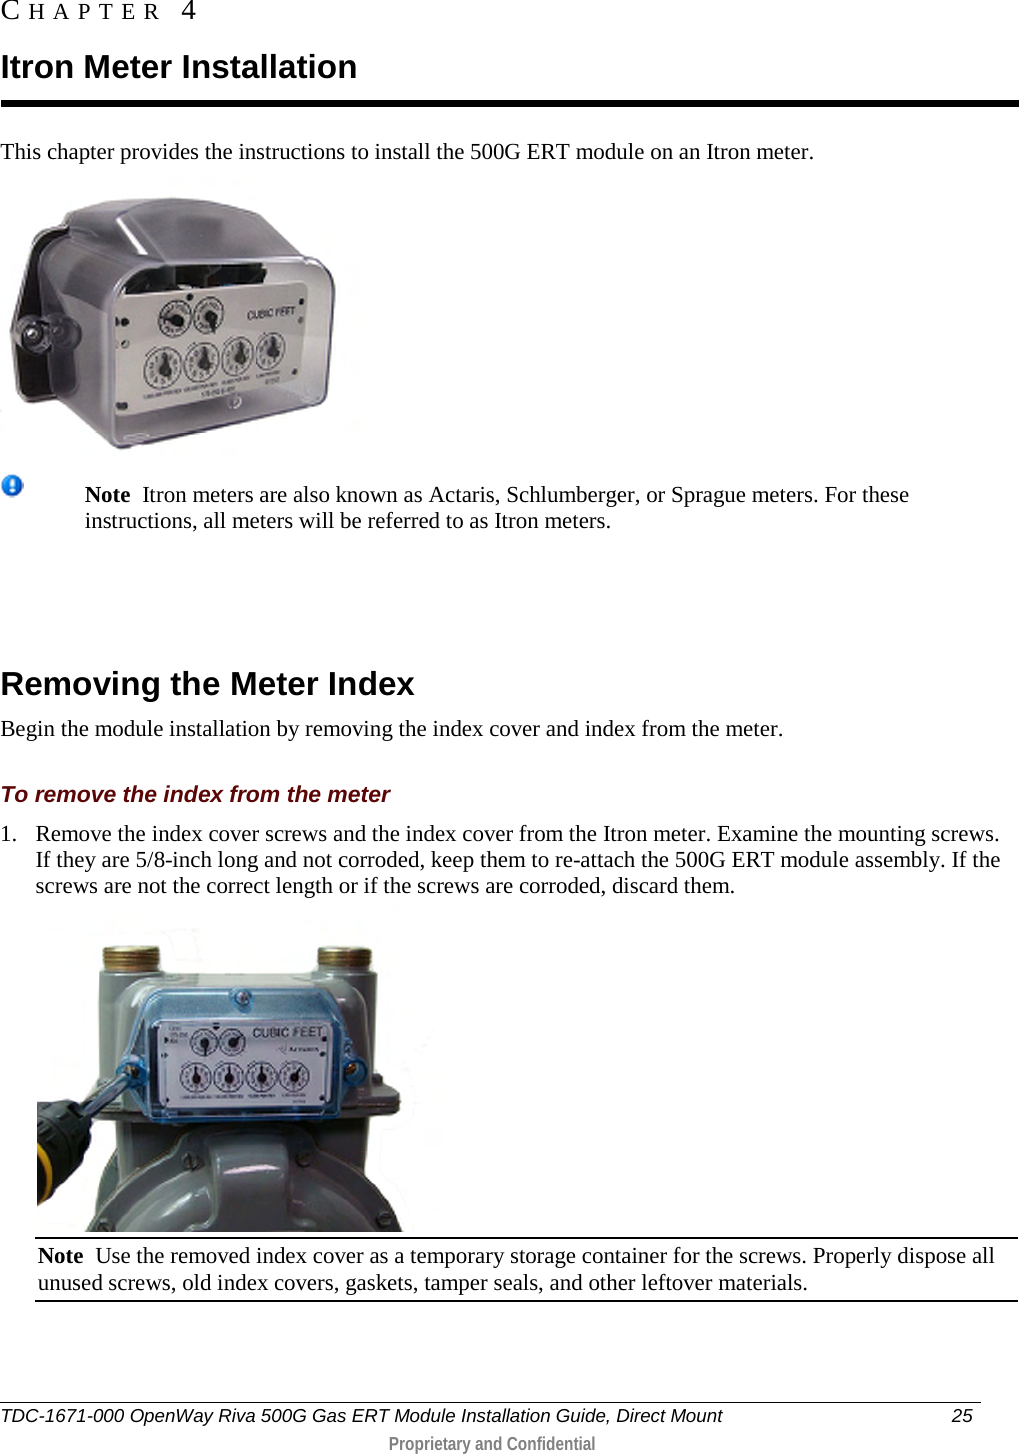  This chapter provides the instructions to install the 500G ERT module on an Itron meter.   Note  Itron meters are also known as Actaris, Schlumberger, or Sprague meters. For these instructions, all meters will be referred to as Itron meters.    Removing the Meter Index Begin the module installation by removing the index cover and index from the meter.  To remove the index from the meter 1. Remove the index cover screws and the index cover from the Itron meter. Examine the mounting screws. If they are 5/8-inch long and not corroded, keep them to re-attach the 500G ERT module assembly. If the screws are not the correct length or if the screws are corroded, discard them.   Note  Use the removed index cover as a temporary storage container for the screws. Properly dispose all unused screws, old index covers, gaskets, tamper seals, and other leftover materials.  CHAPTER  4  Itron Meter Installation TDC-1671-000 OpenWay Riva 500G Gas ERT Module Installation Guide, Direct Mount 25   Proprietary and Confidential  